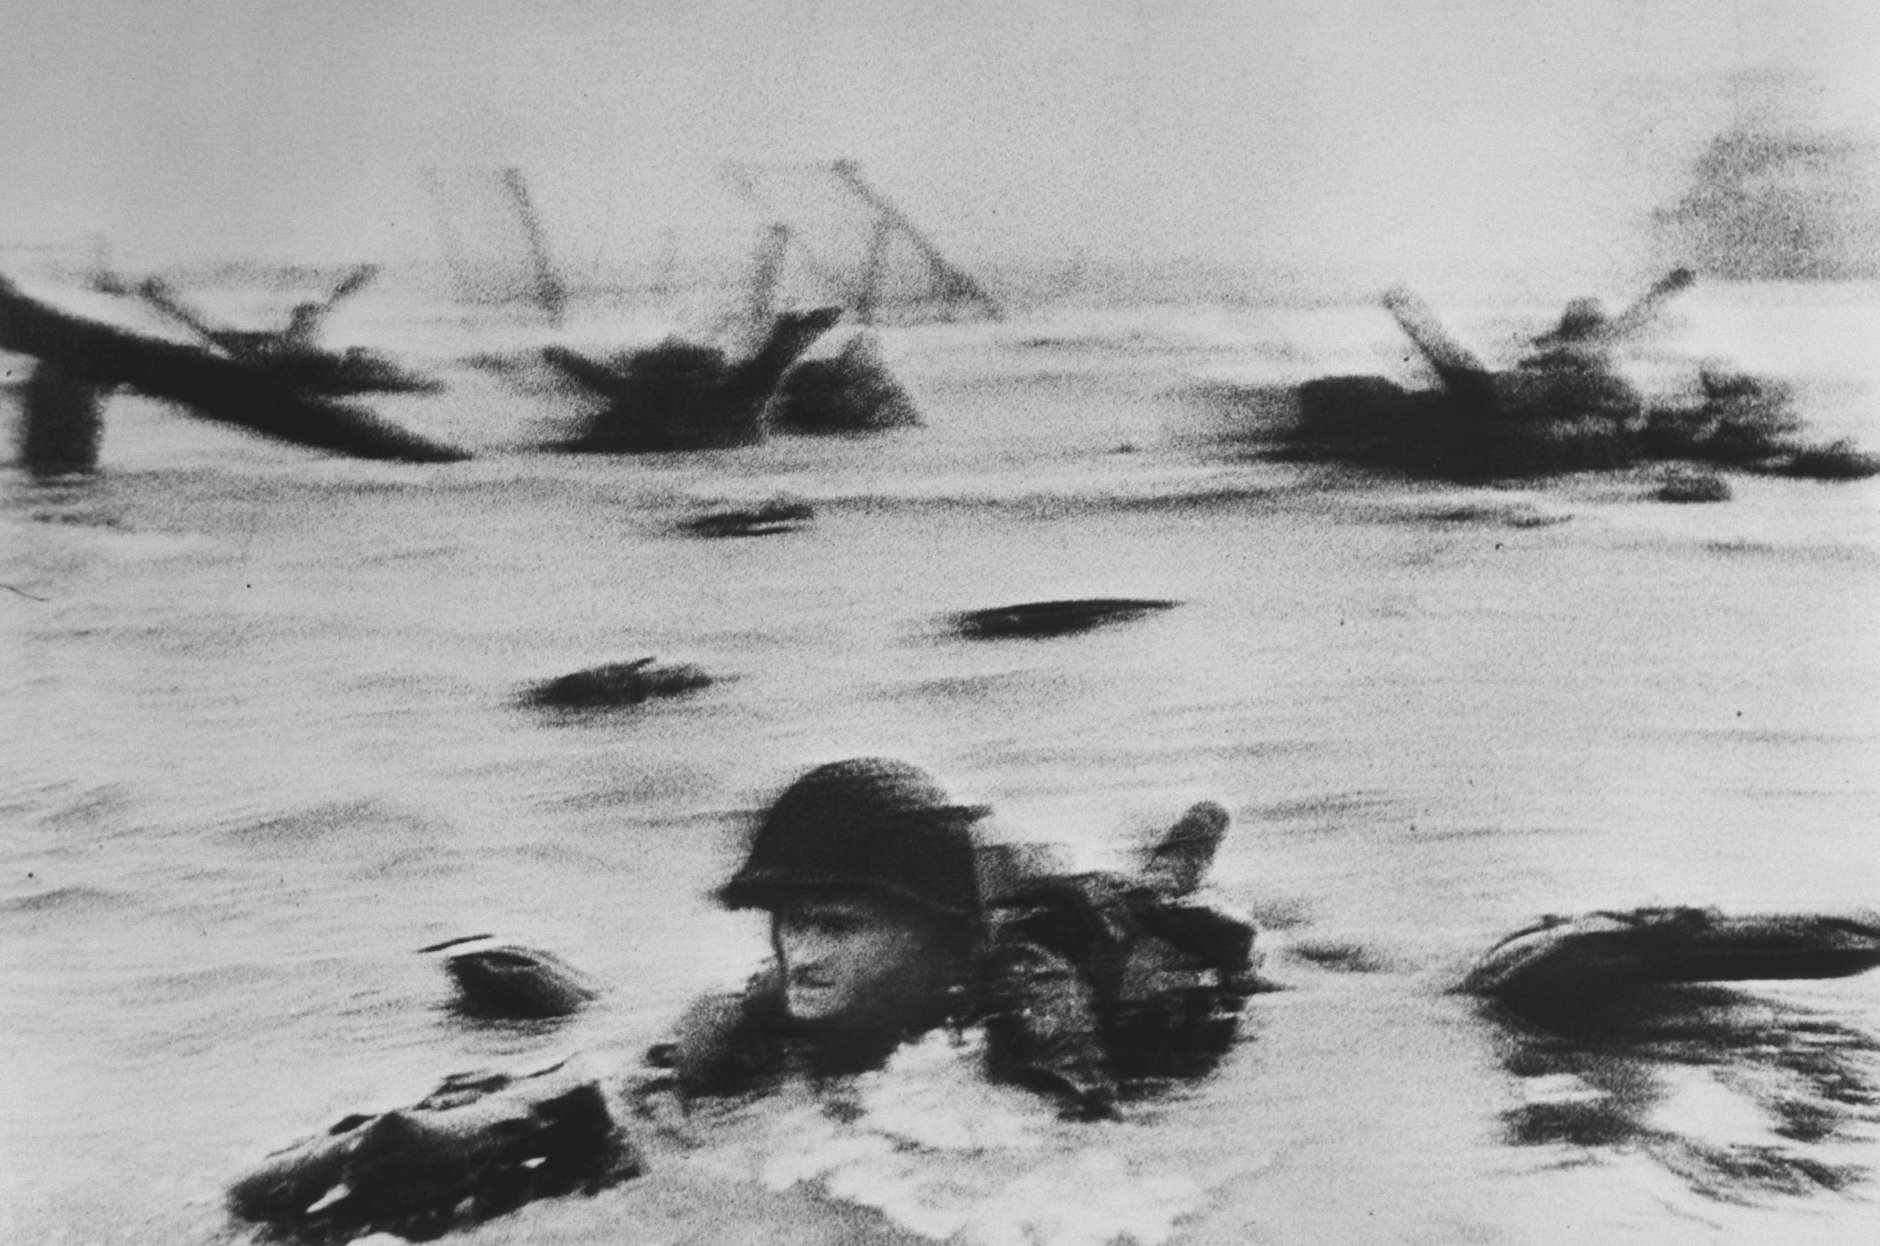 Robert Capa, [American troops landing on Omaha Beach, D-Day, Normandy, France], June 6th, 1944
©International Center of Photography/Magnum Photos